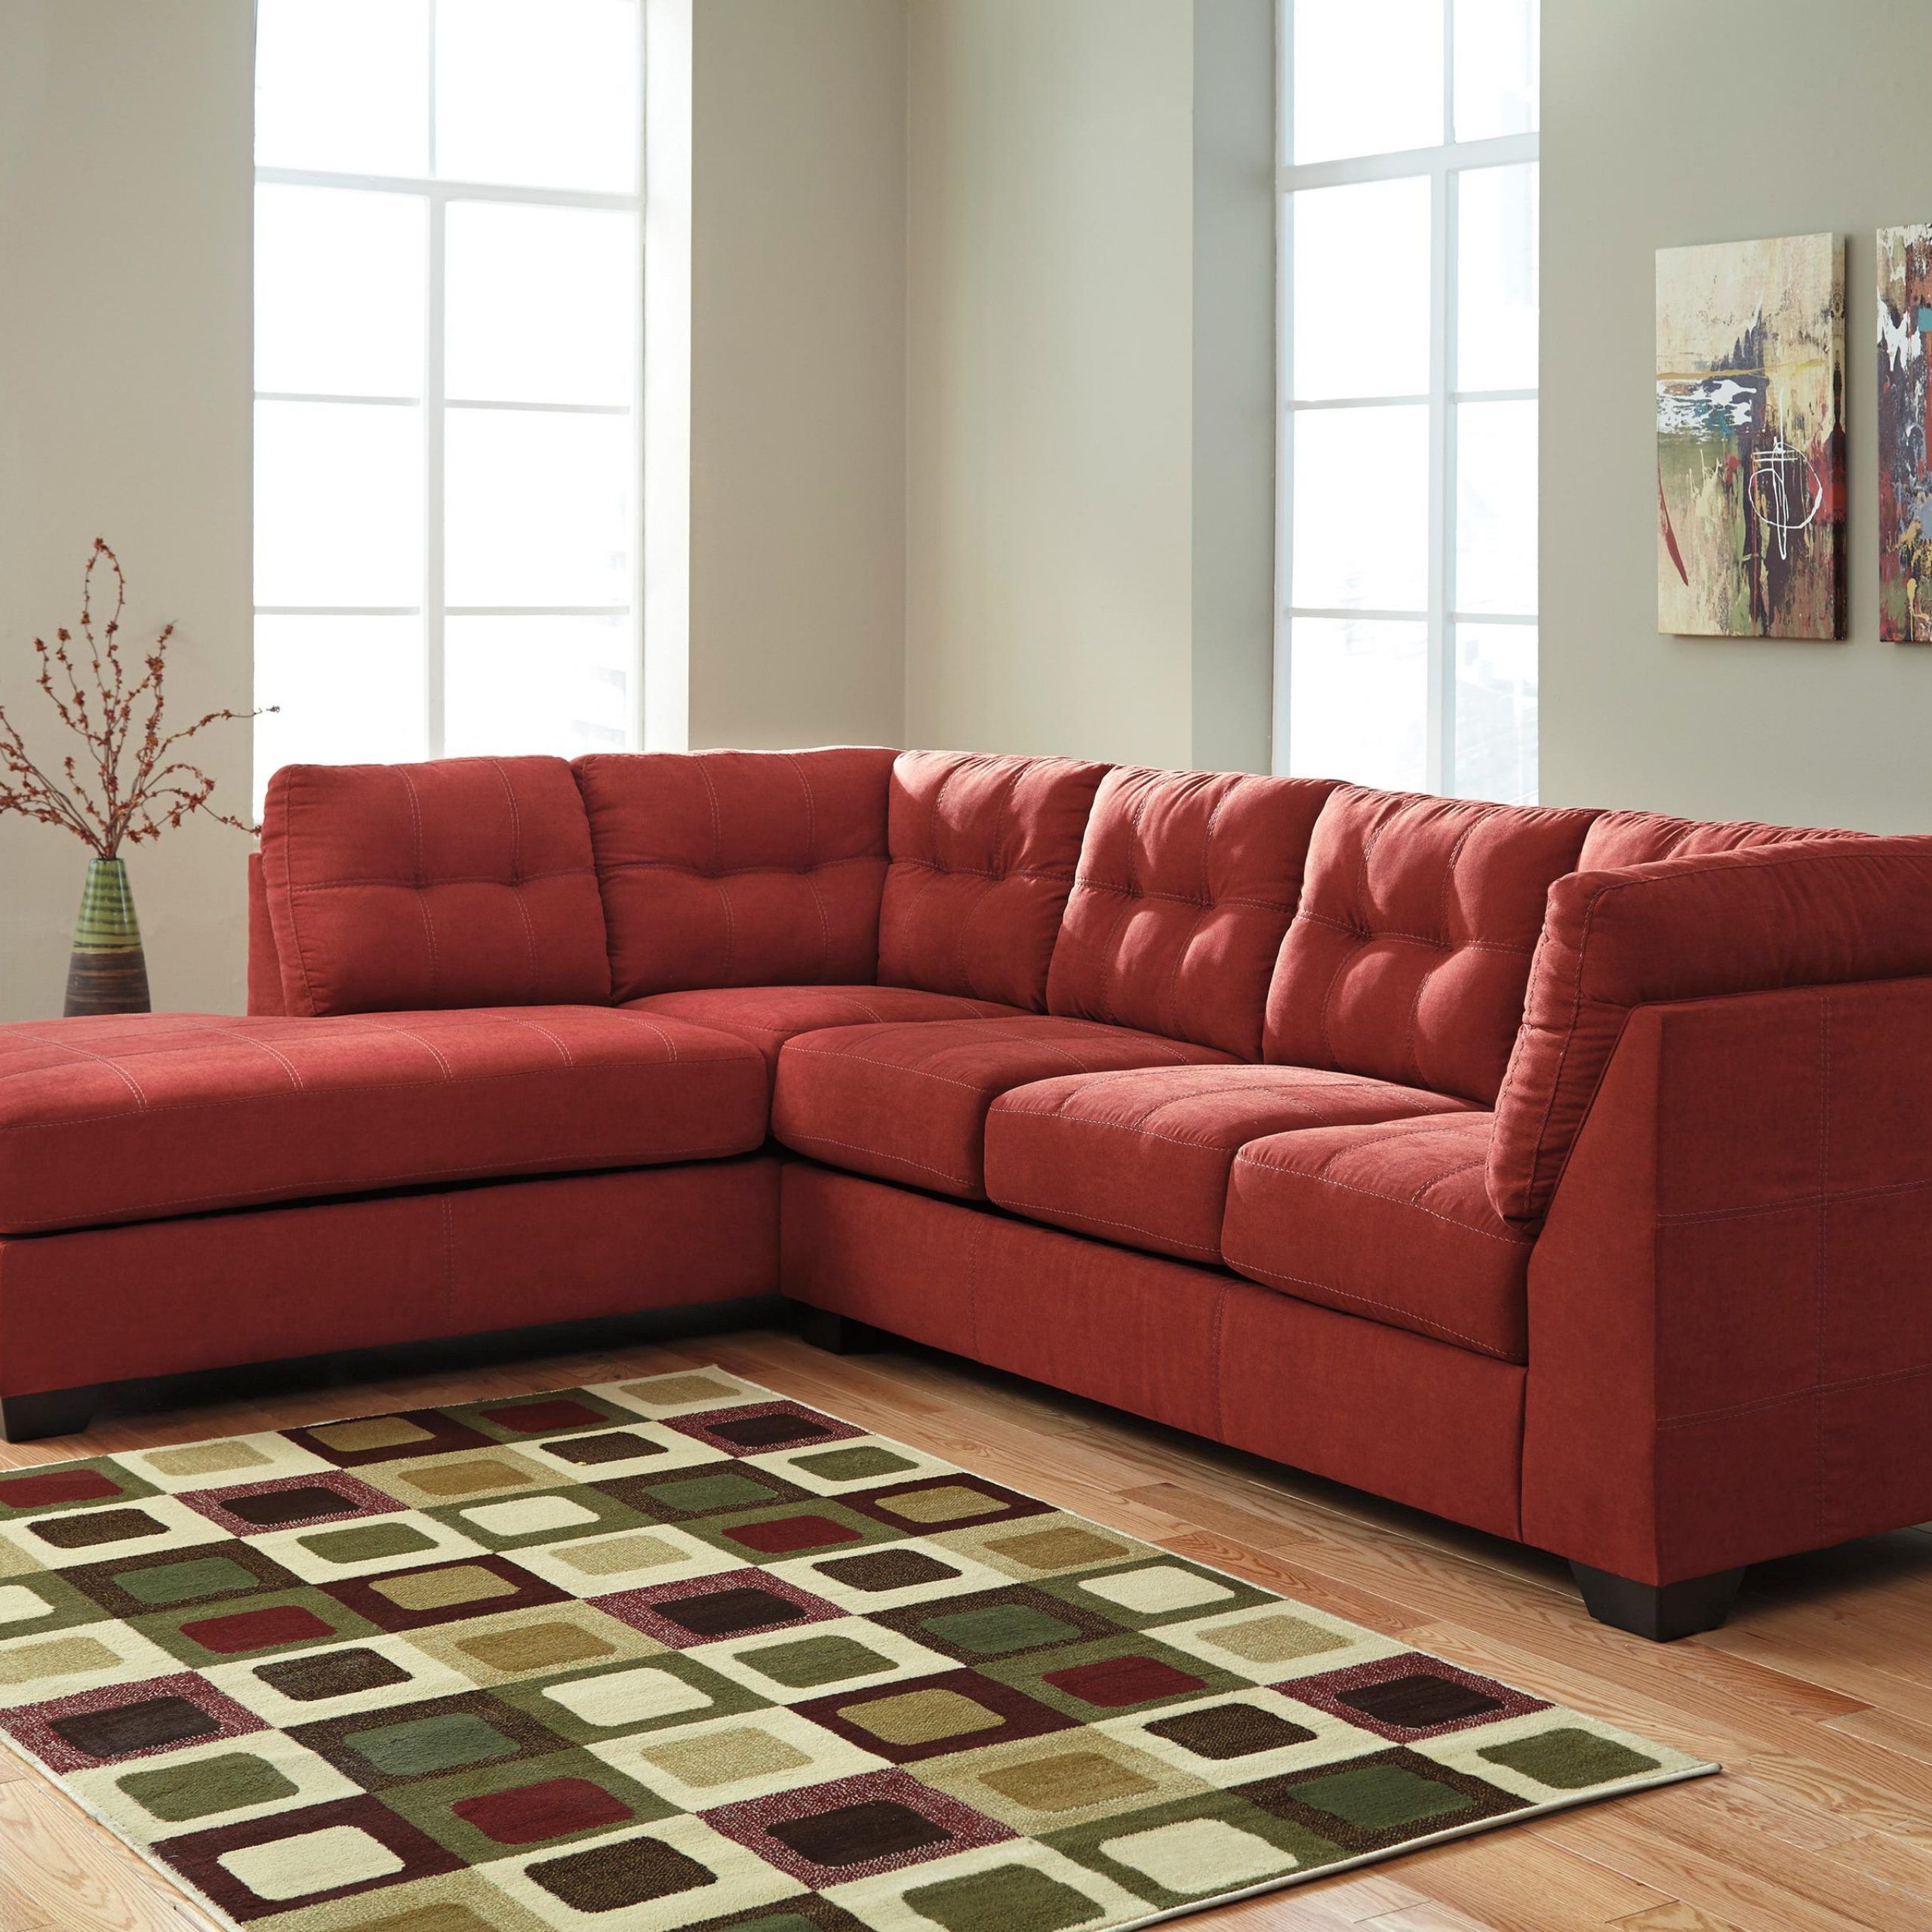 Benchcraft Maier – Sienna 2 Piece Sectional W/ Sleeper With Regard To Hannah Left Sectional Sofas (View 6 of 15)